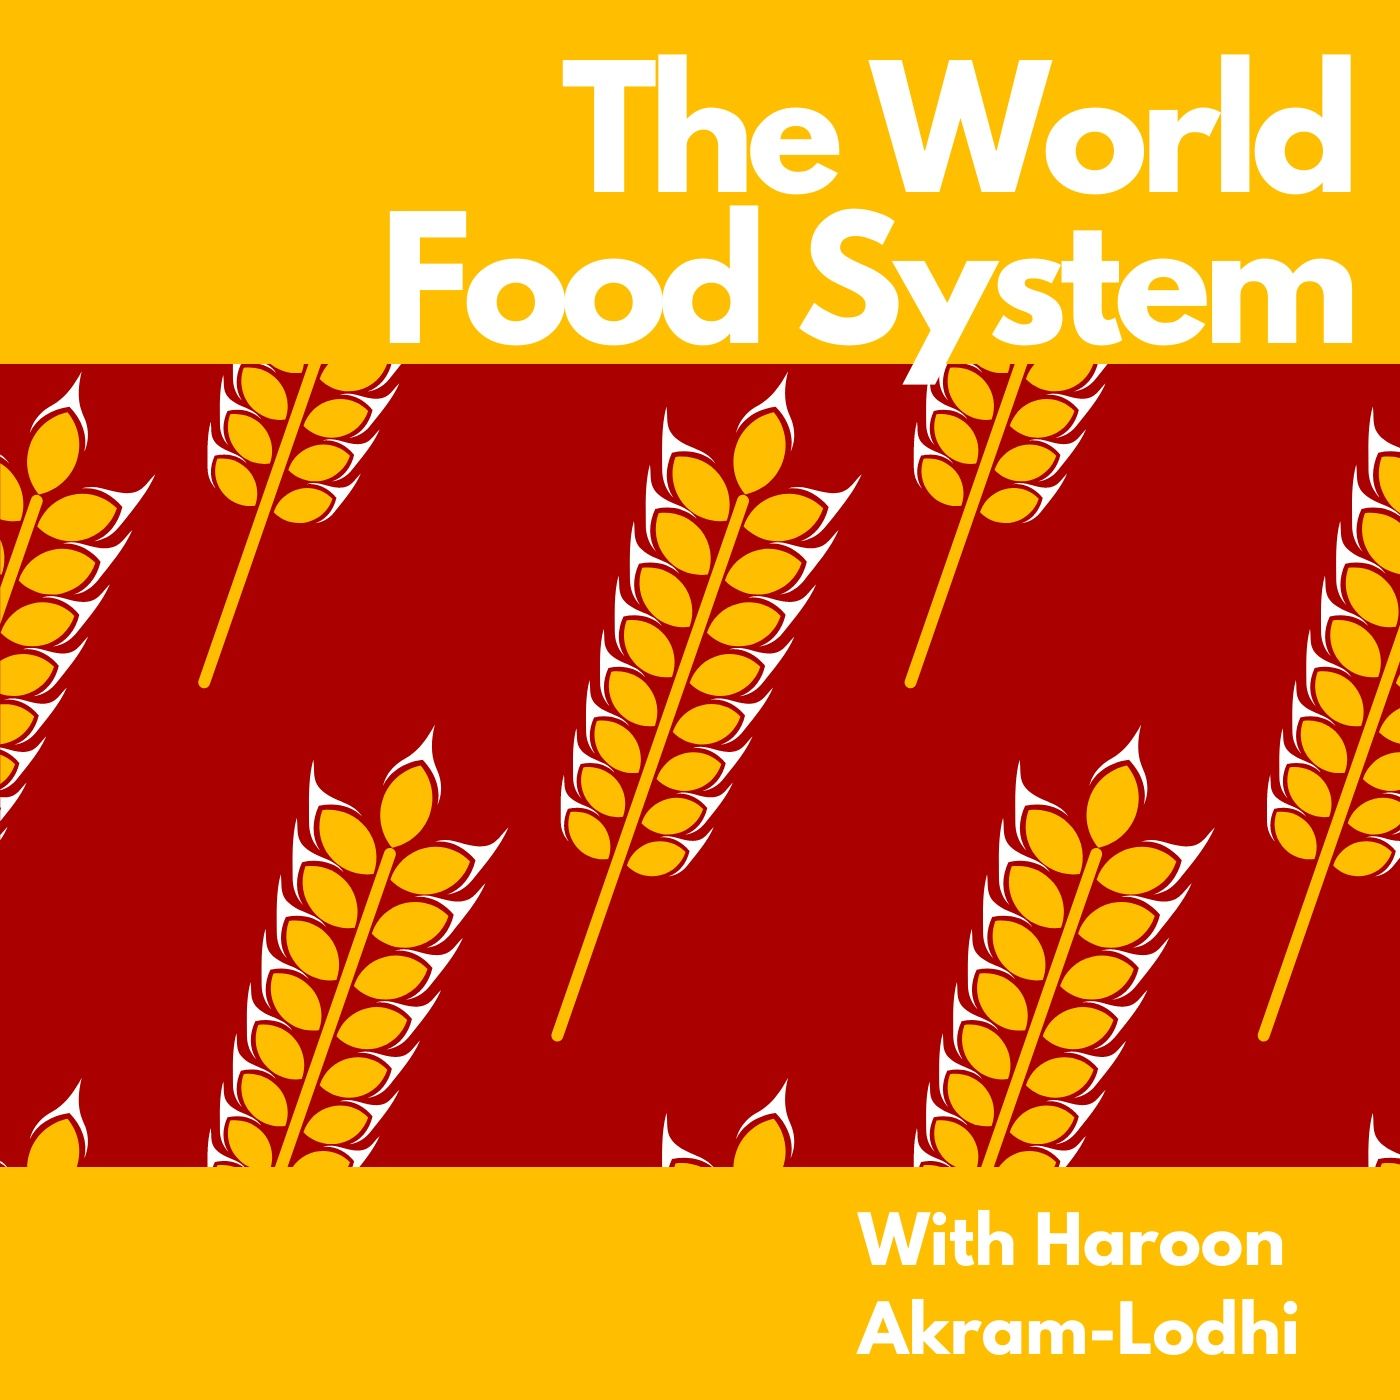 The World Food System